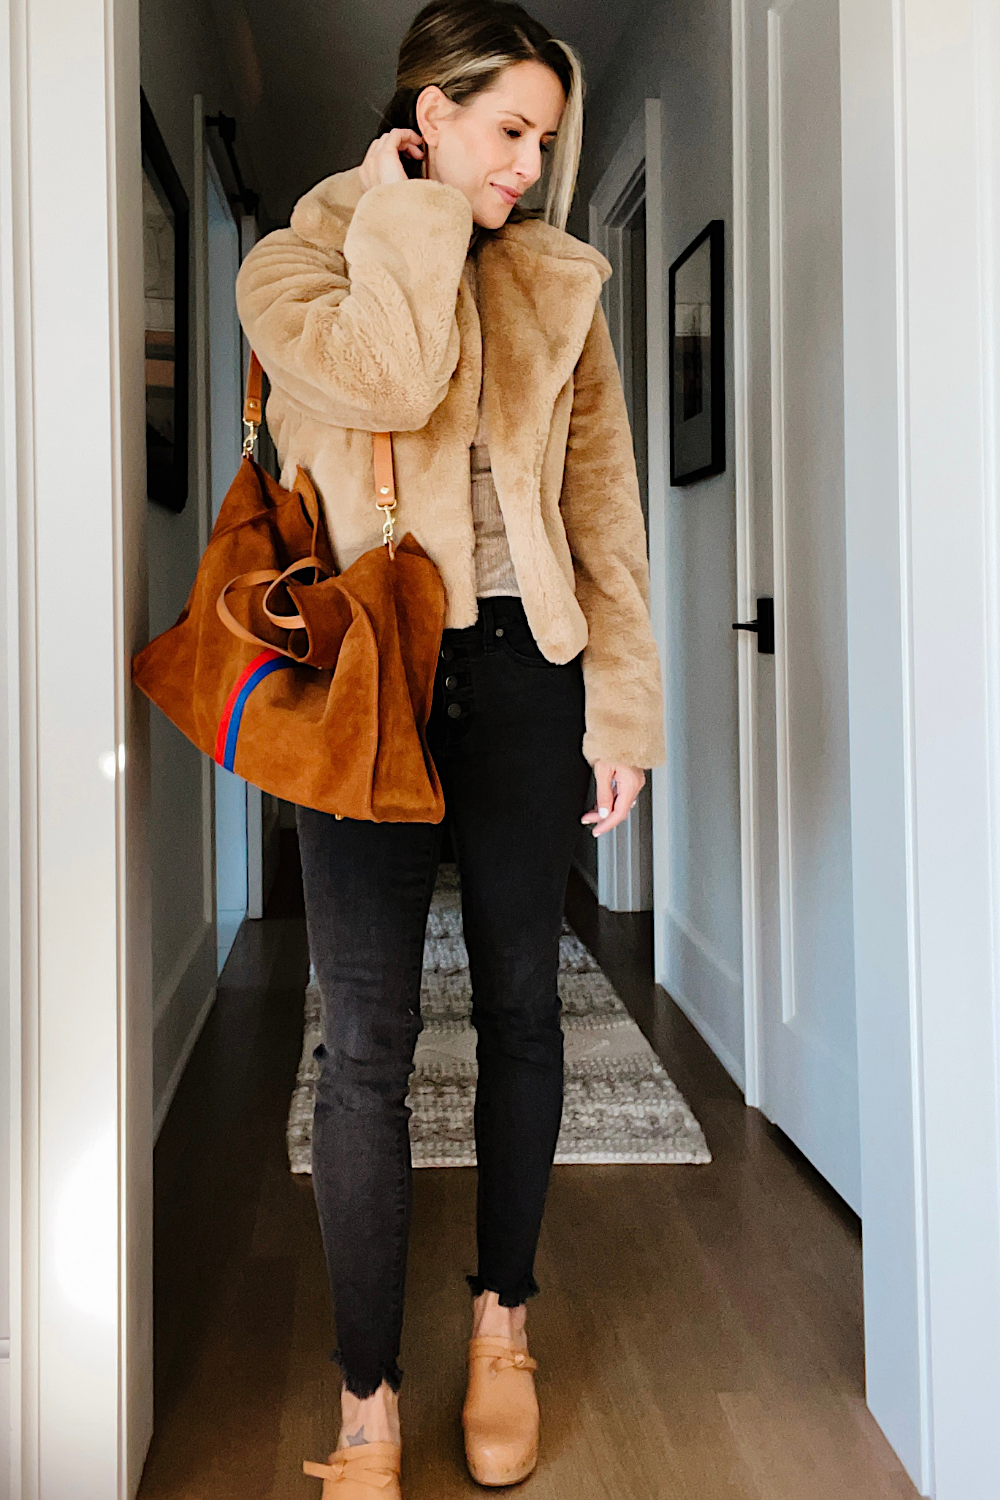 Suzanne wearing a faux fur jacket, black skinny jeans, and brown suede tote